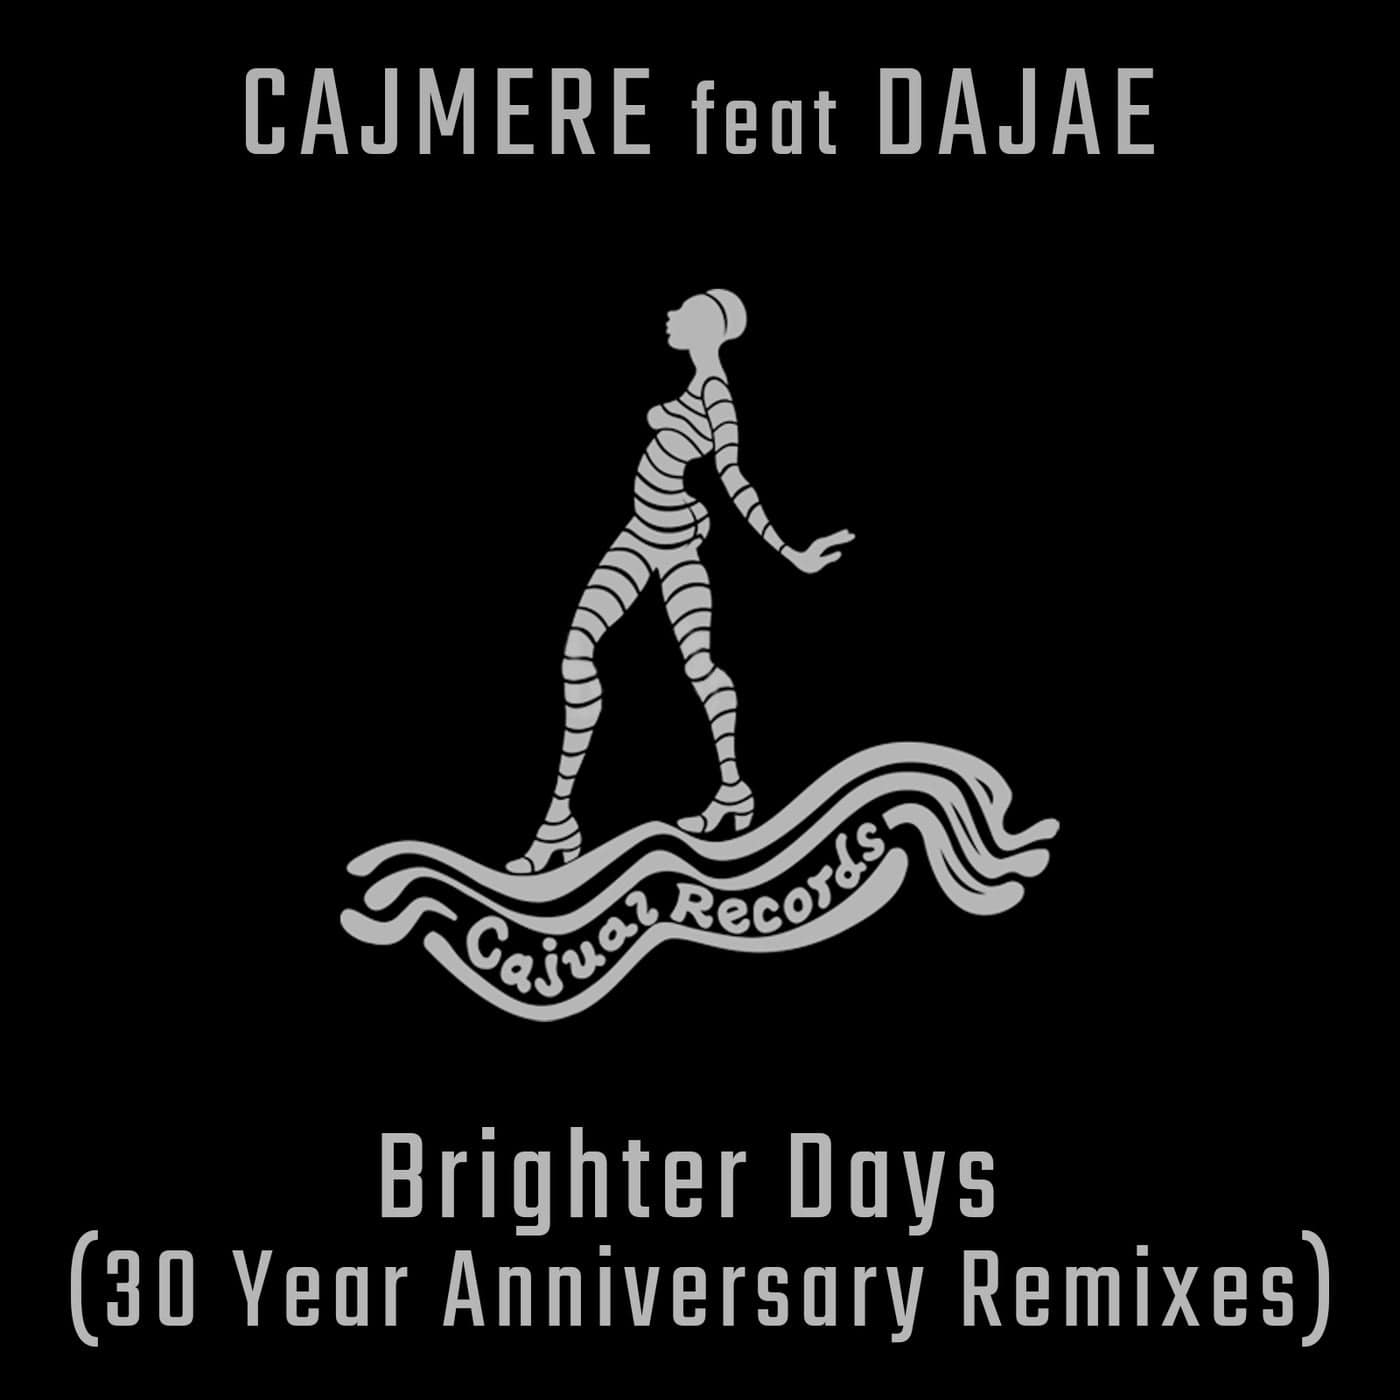 Download Cajmere, Dajae - Brighter Days (30 Year Anniversary Remixes) on Electrobuzz